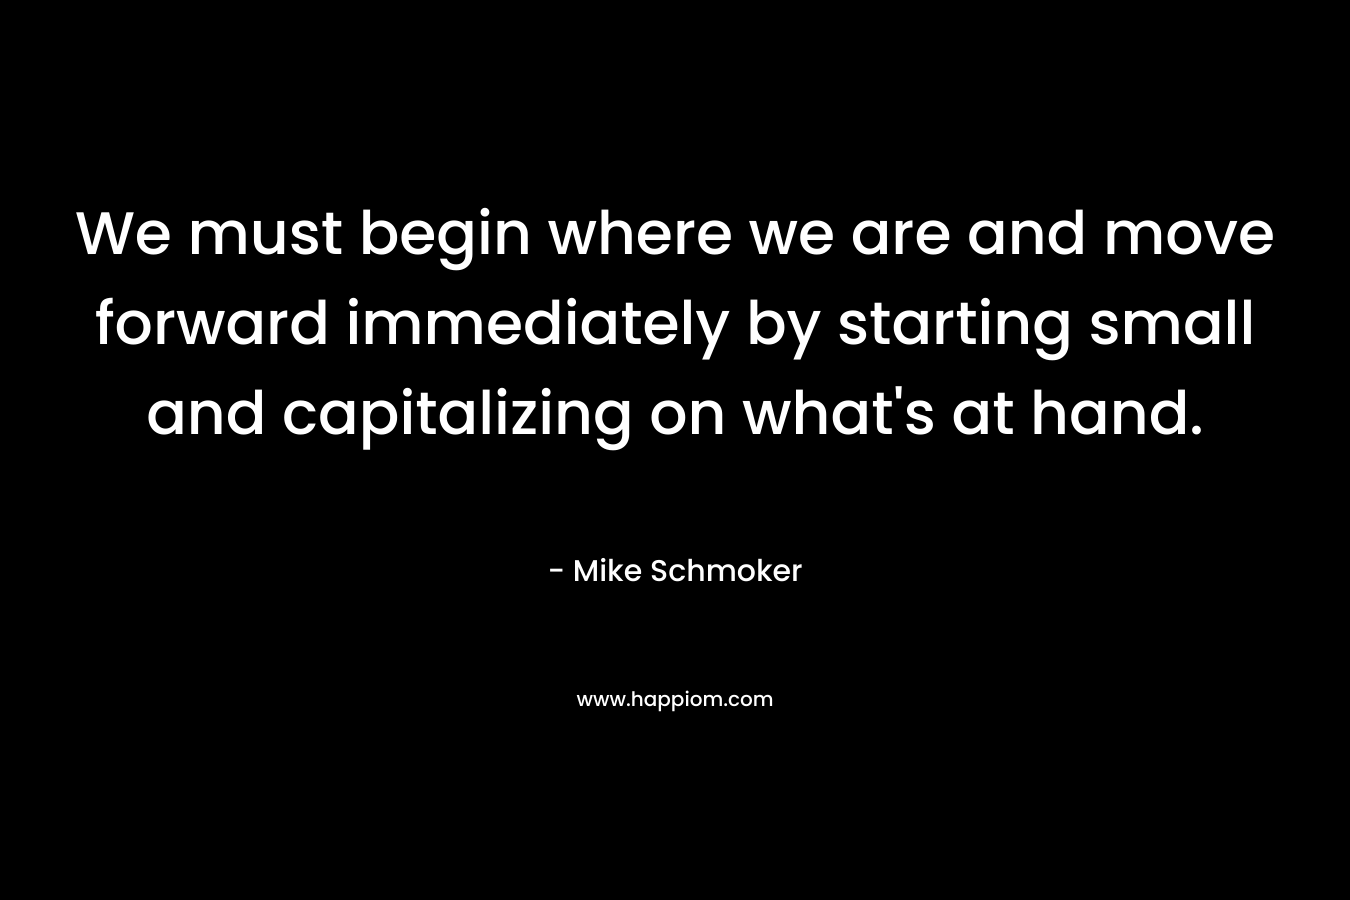 We must begin where we are and move forward immediately by starting small and capitalizing on what’s at hand. – Mike Schmoker